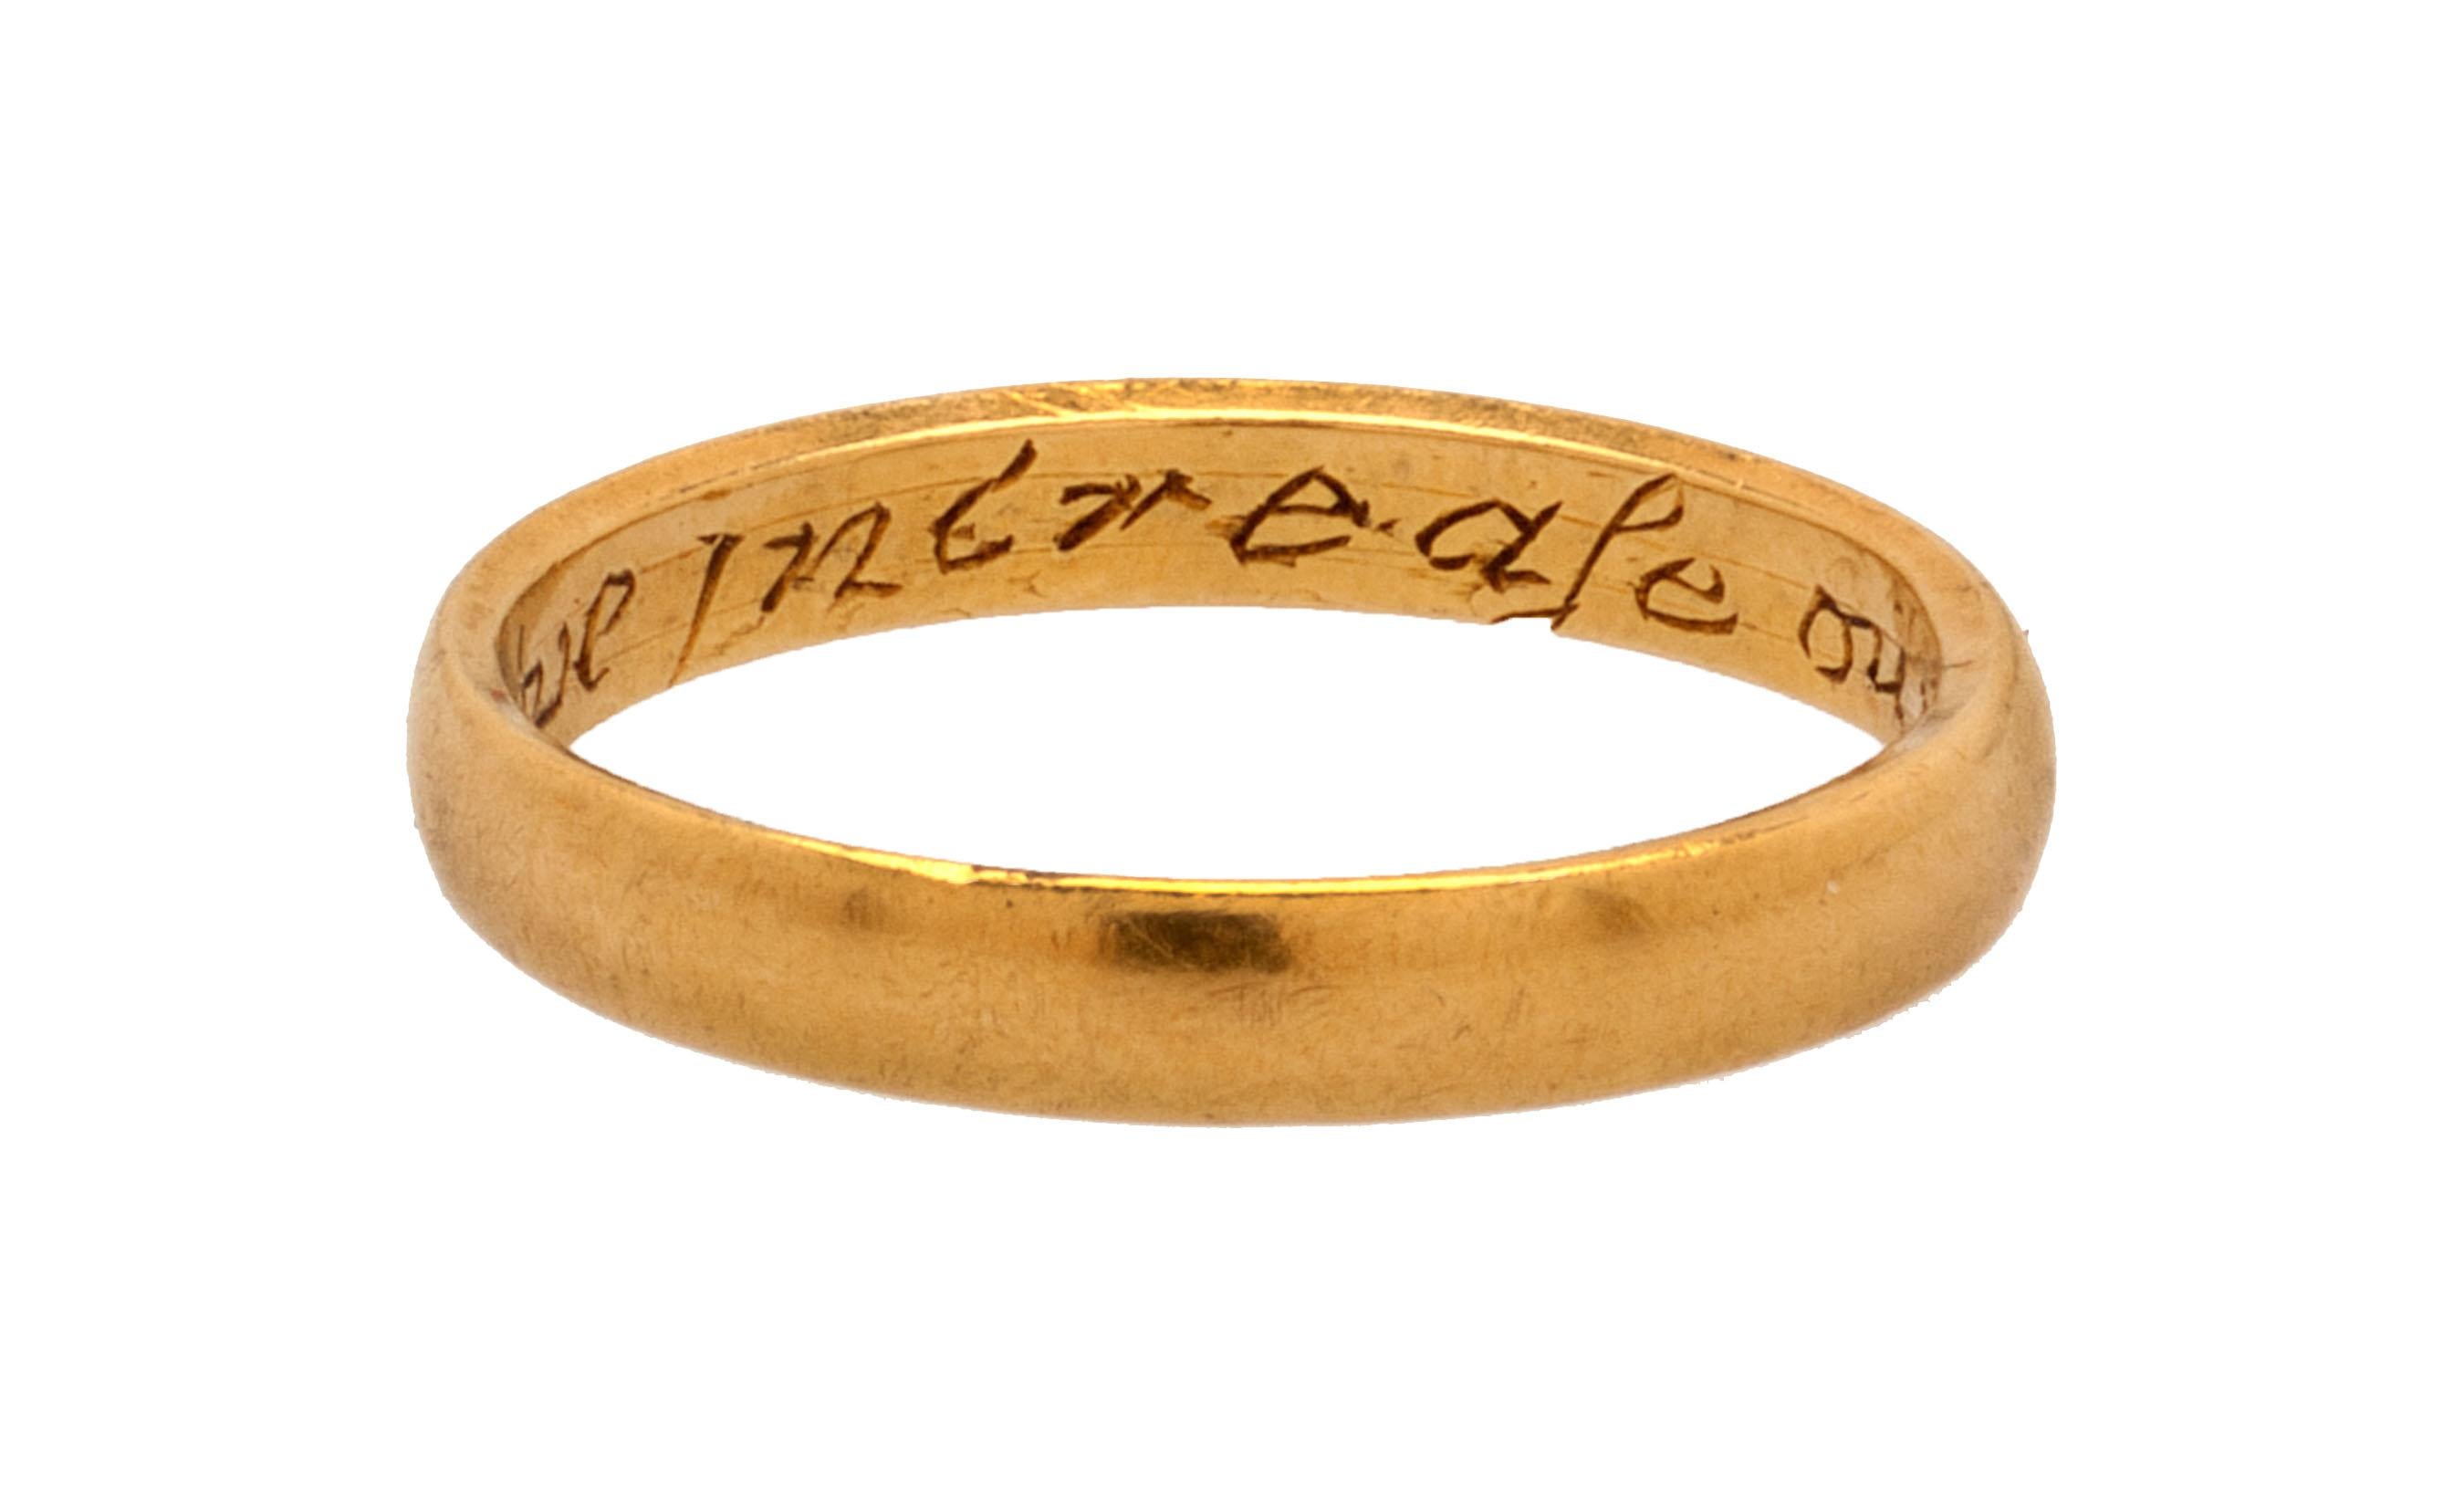 POSY RING “GOD ABOVE INCREASE OUR LOVE”
England, 17th century
Gold
Circumference 57.8 mm.; weight 4.3 gr.; US size 8 ½; UK size Q 1/2

The rounded hoop, flat on its perimeters, is engraved on the inside with the motto “God above increase our love”